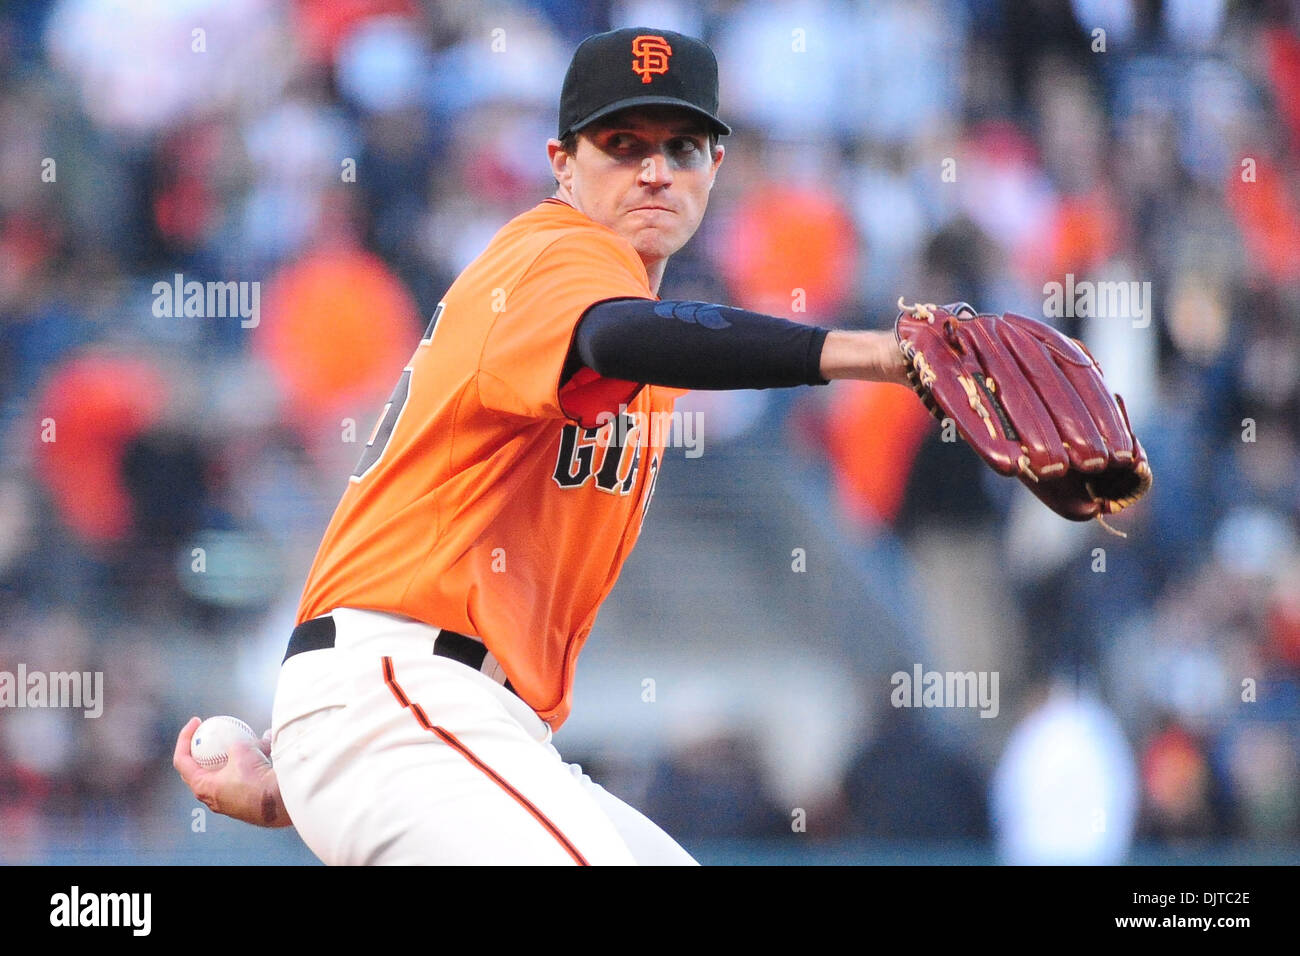 San Francisco, CA: San Francisco Giants' pitcher Barry Zito (75) pitches the ball. The Giants won the game 5-2. (Credit Image: © Charles Herskowitz/Southcreek Global/ZUMApress.com) Stock Photo